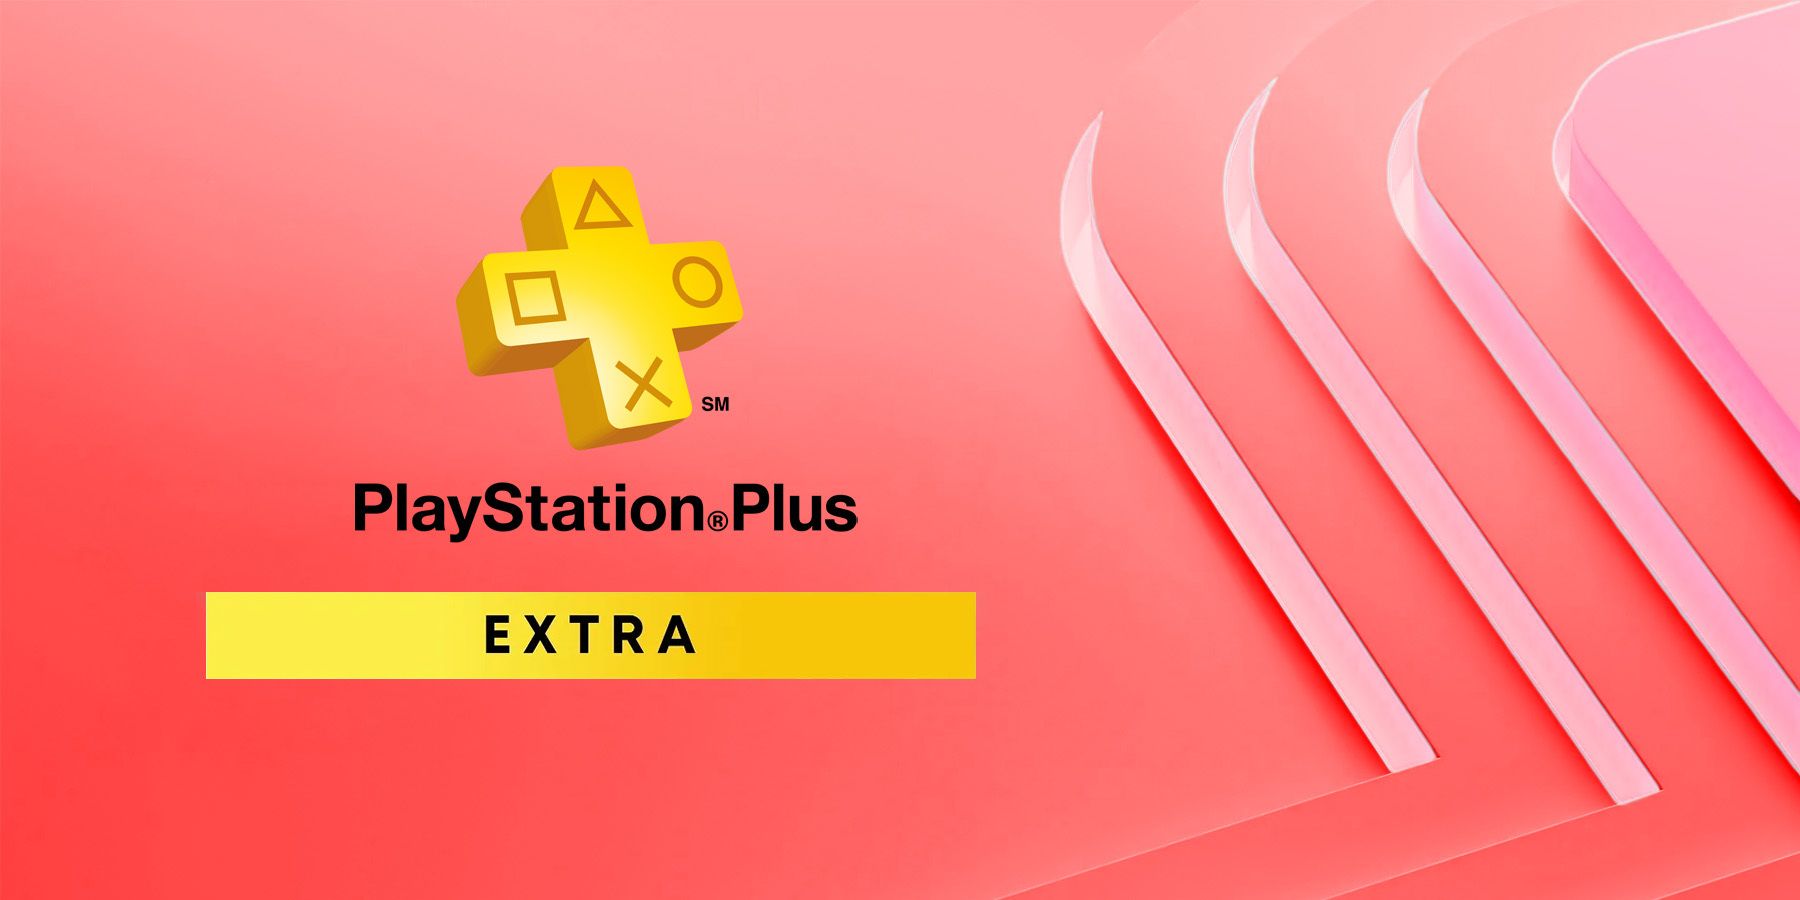 PS Plus Extra & Premium Games for Feb are Awesome! #psplus #psplusextr